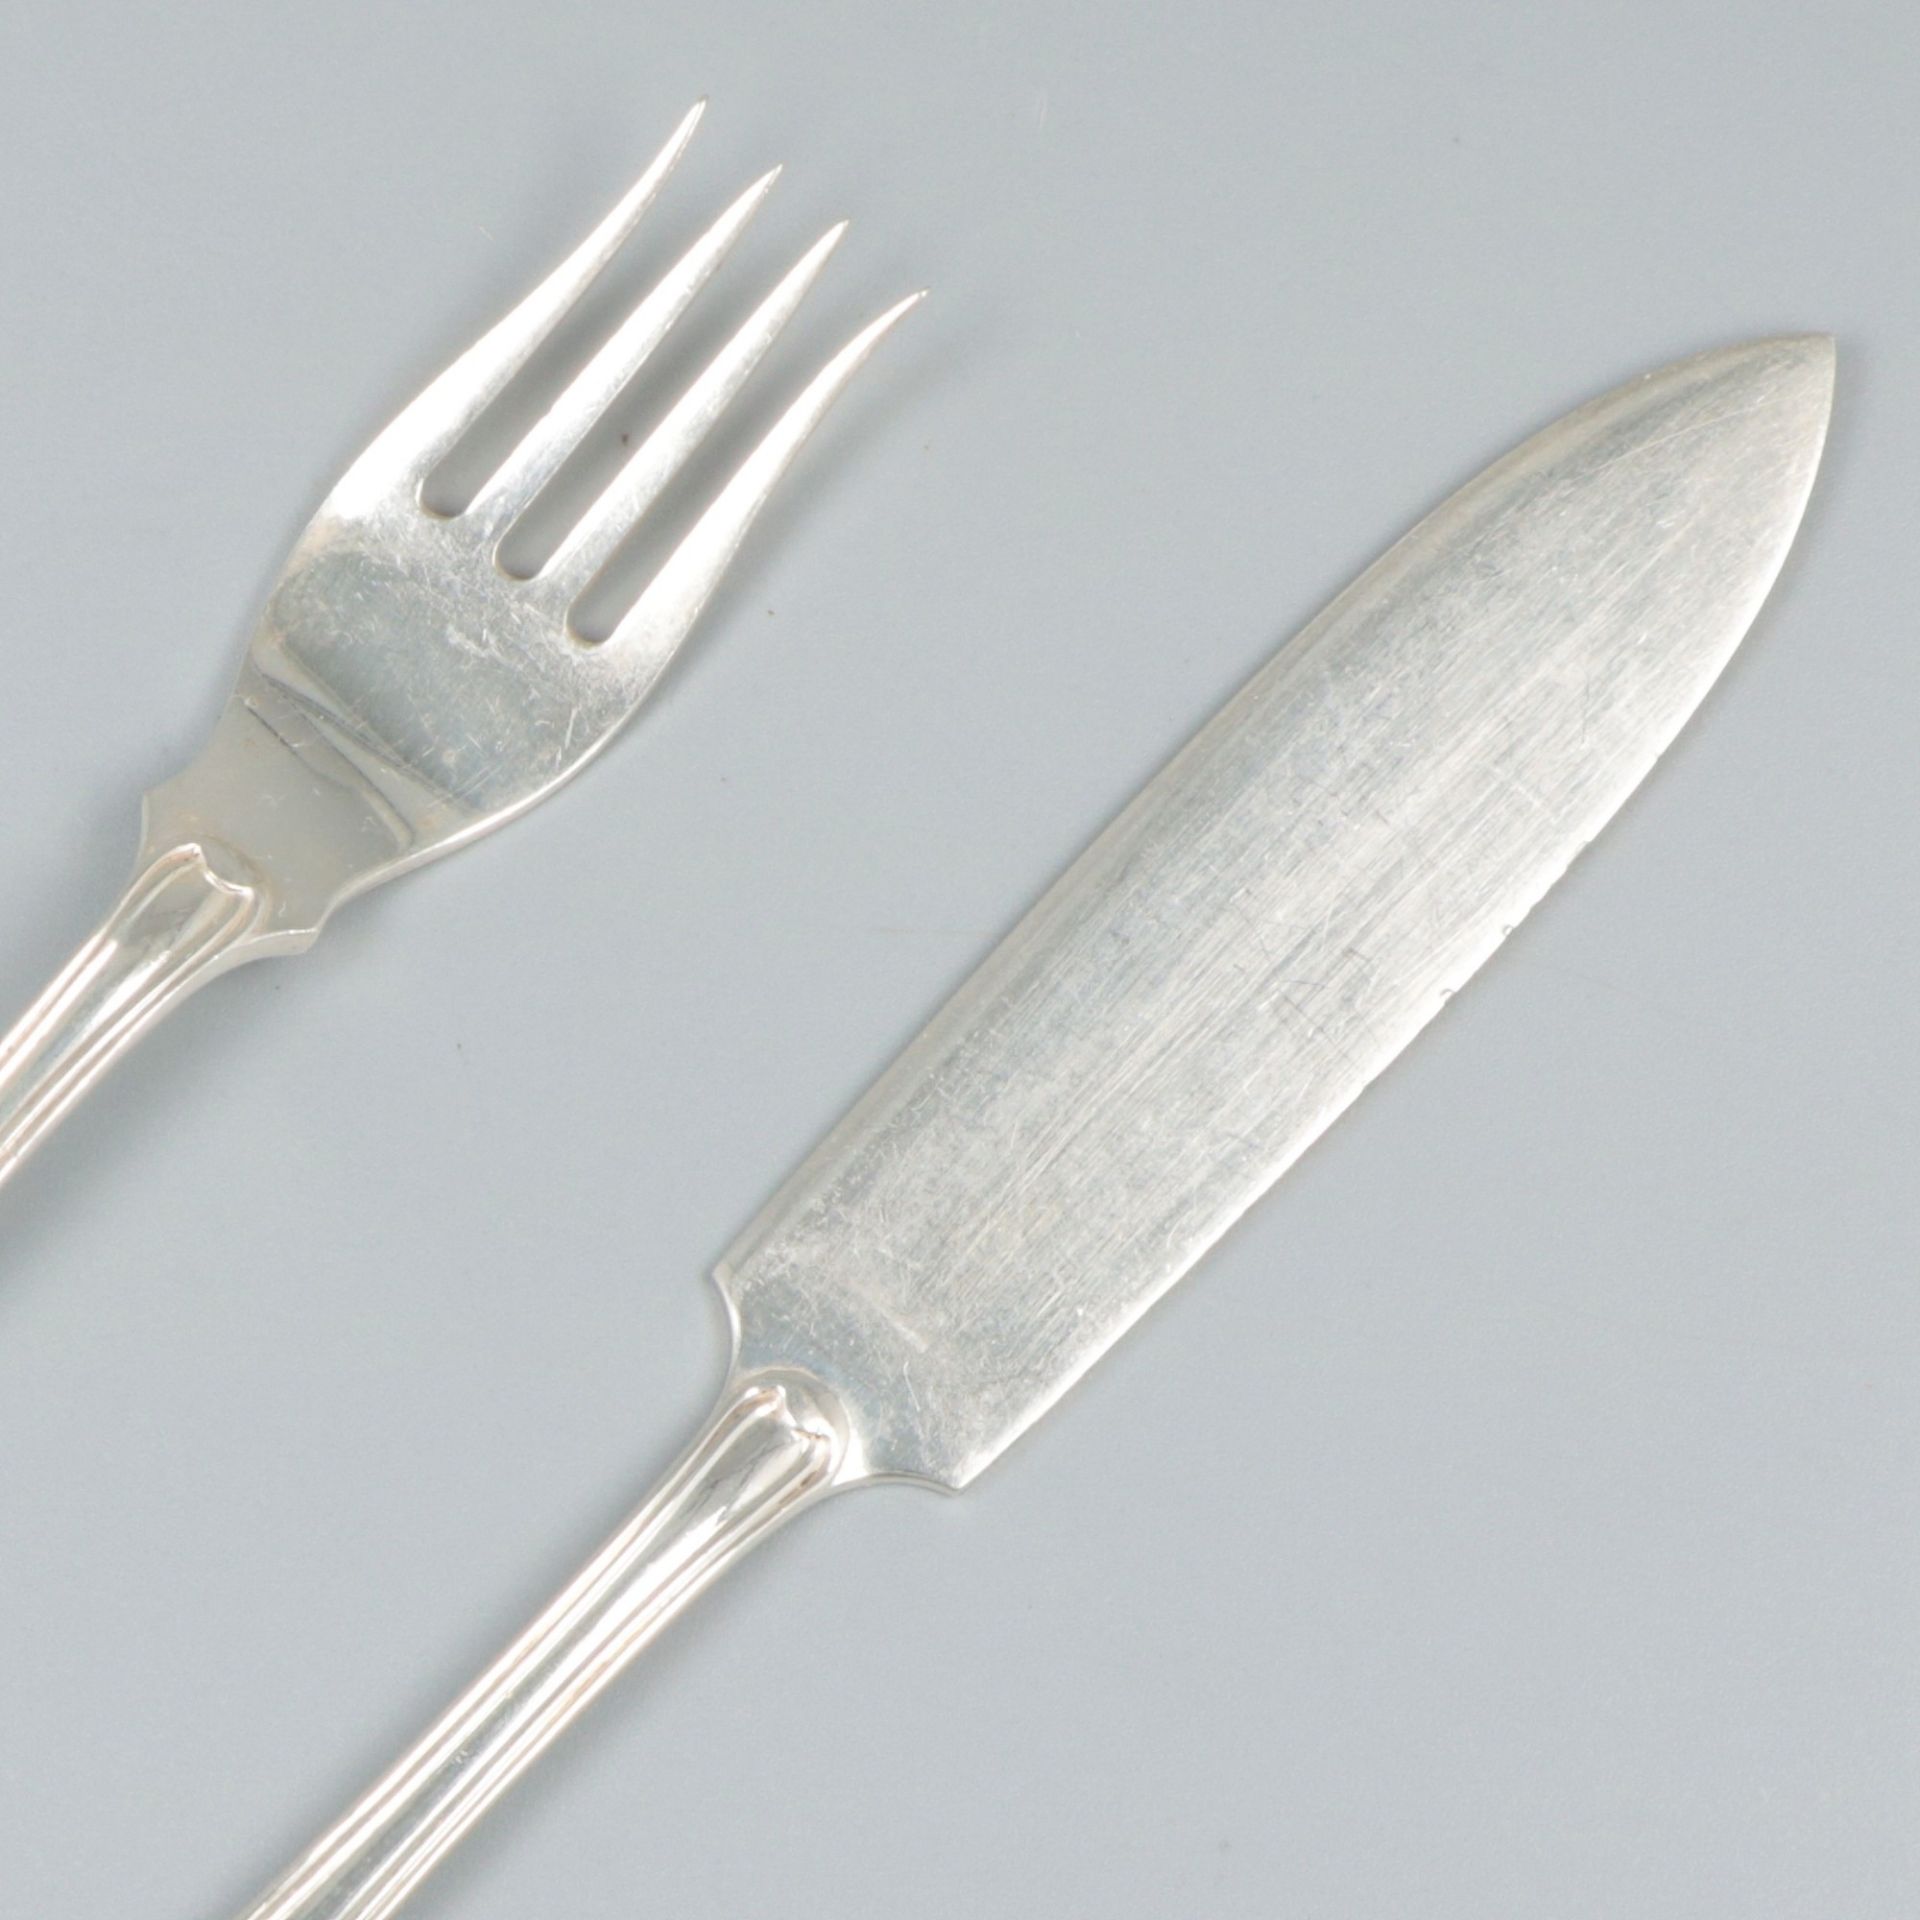 8-piece fish cutlery "Hollands Rondfilet", silver. - Image 4 of 6